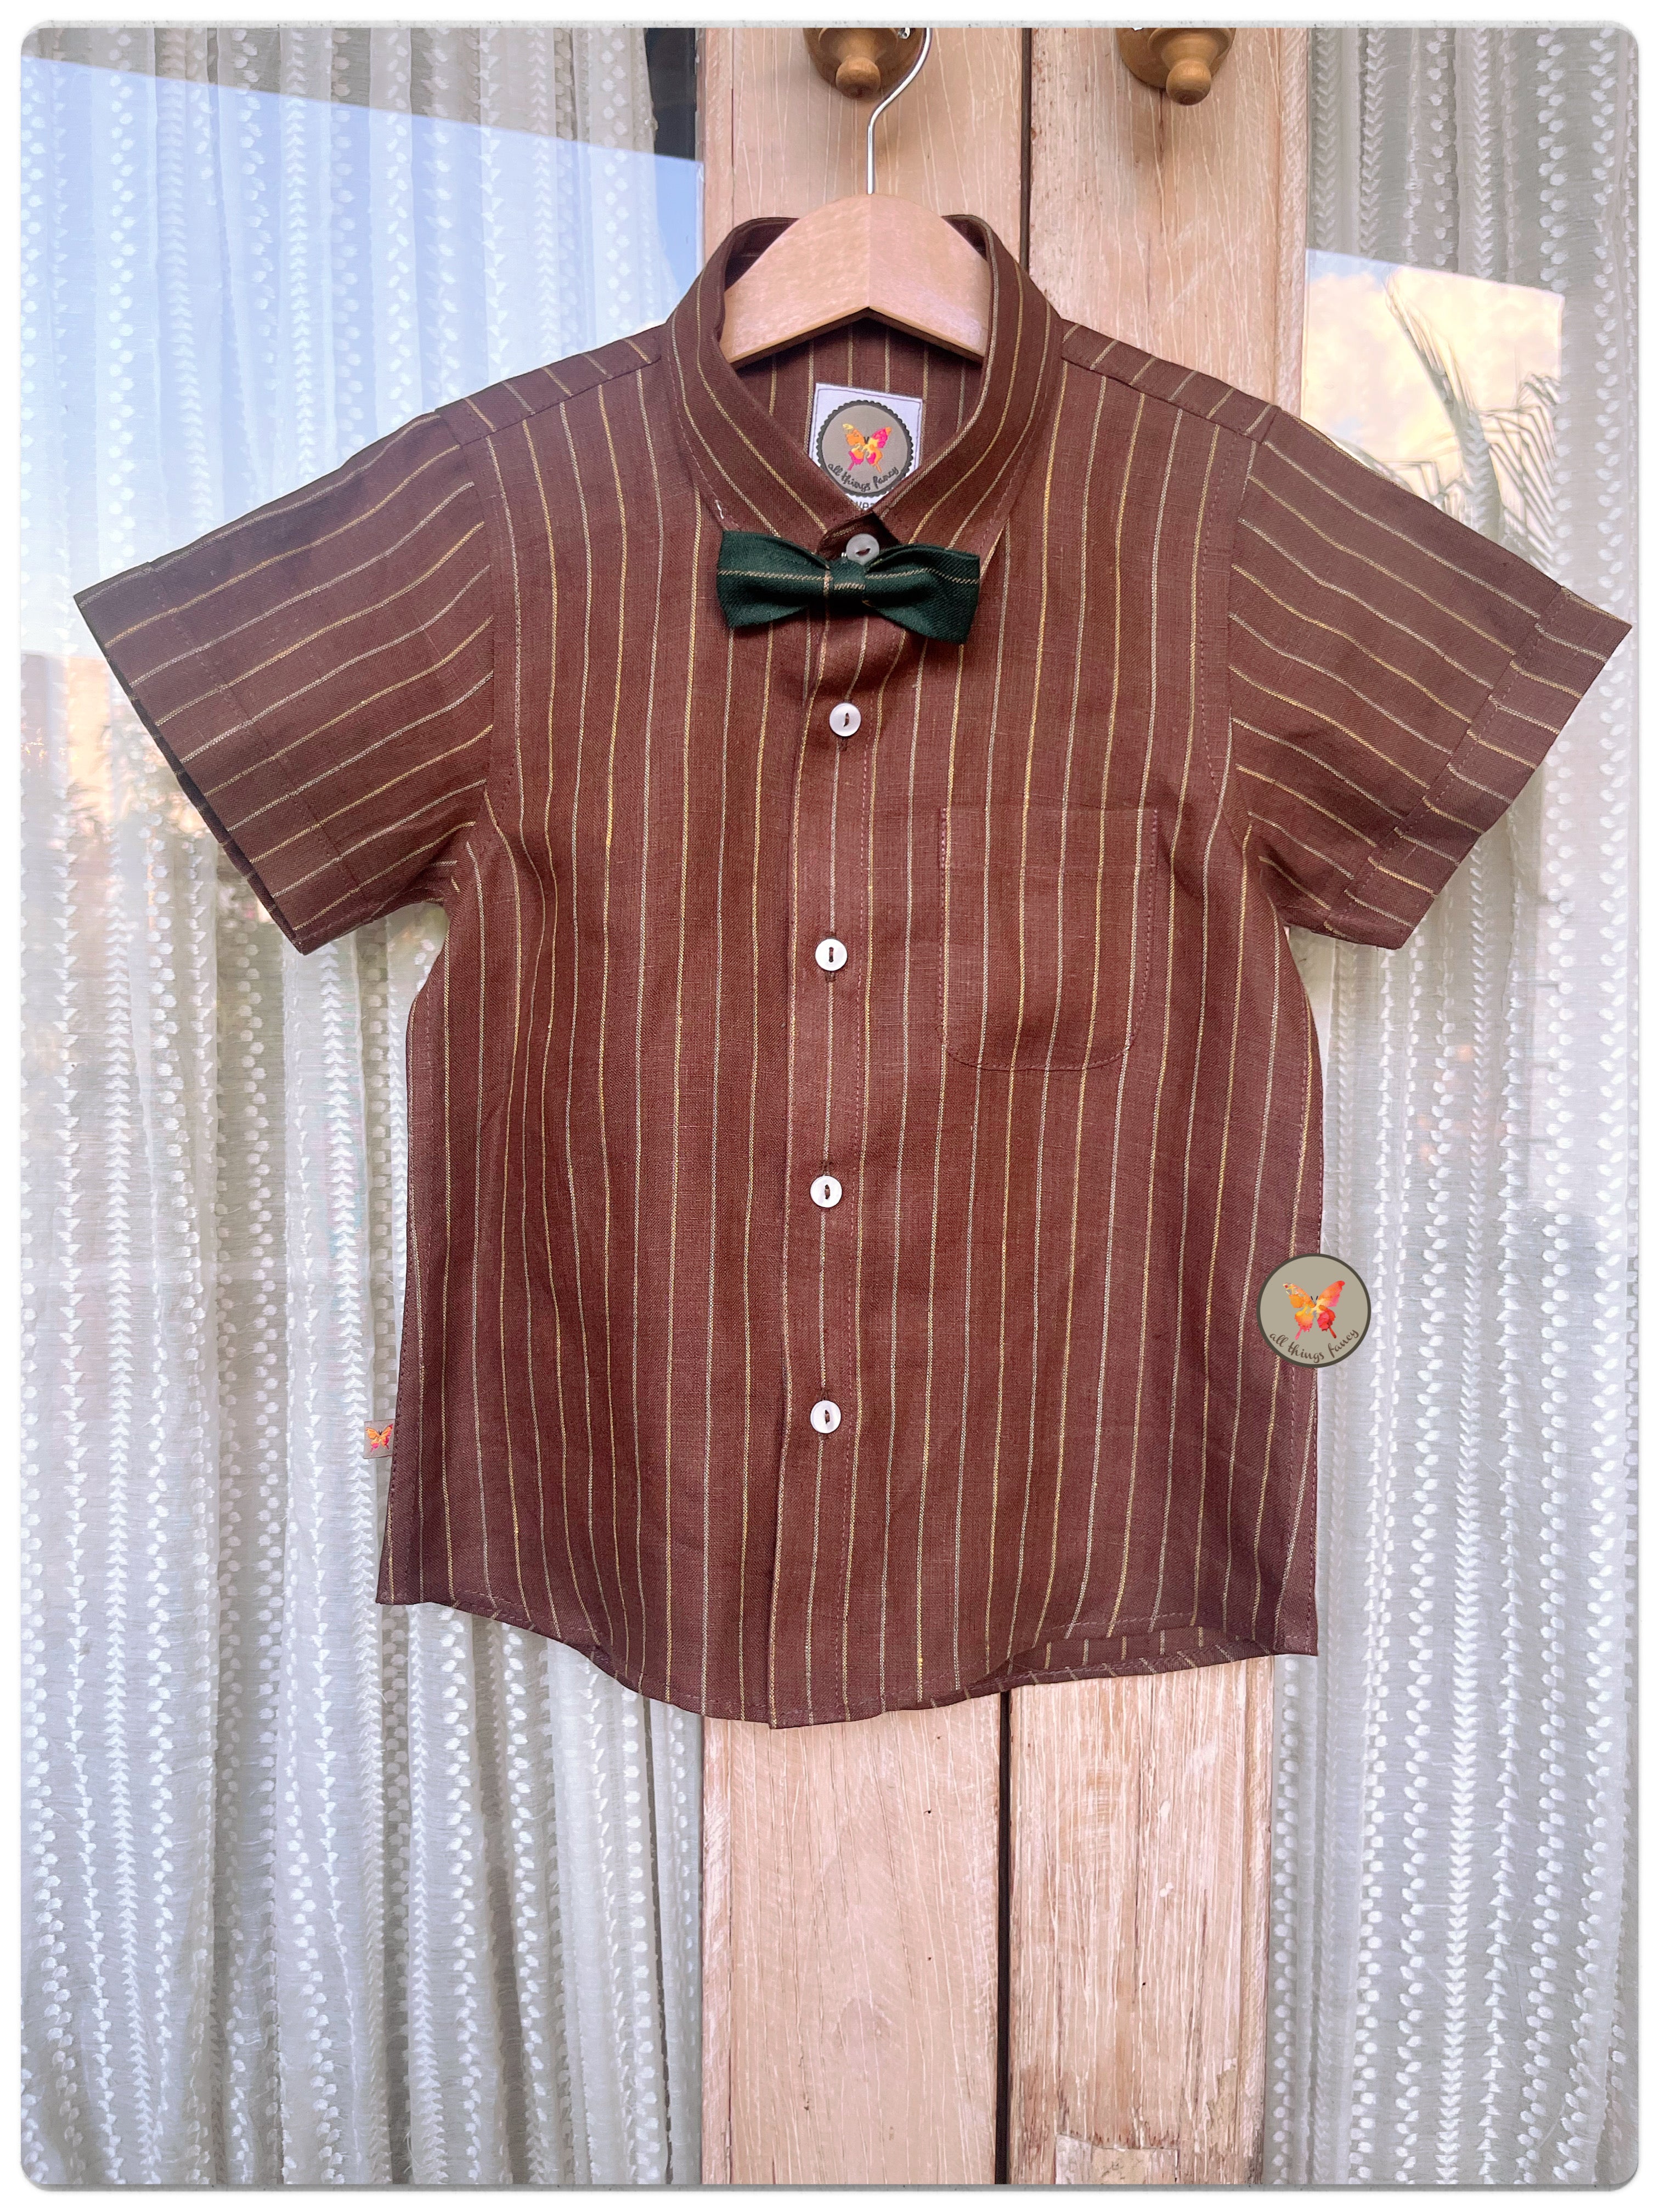 Chocolate stripes shirt with bow